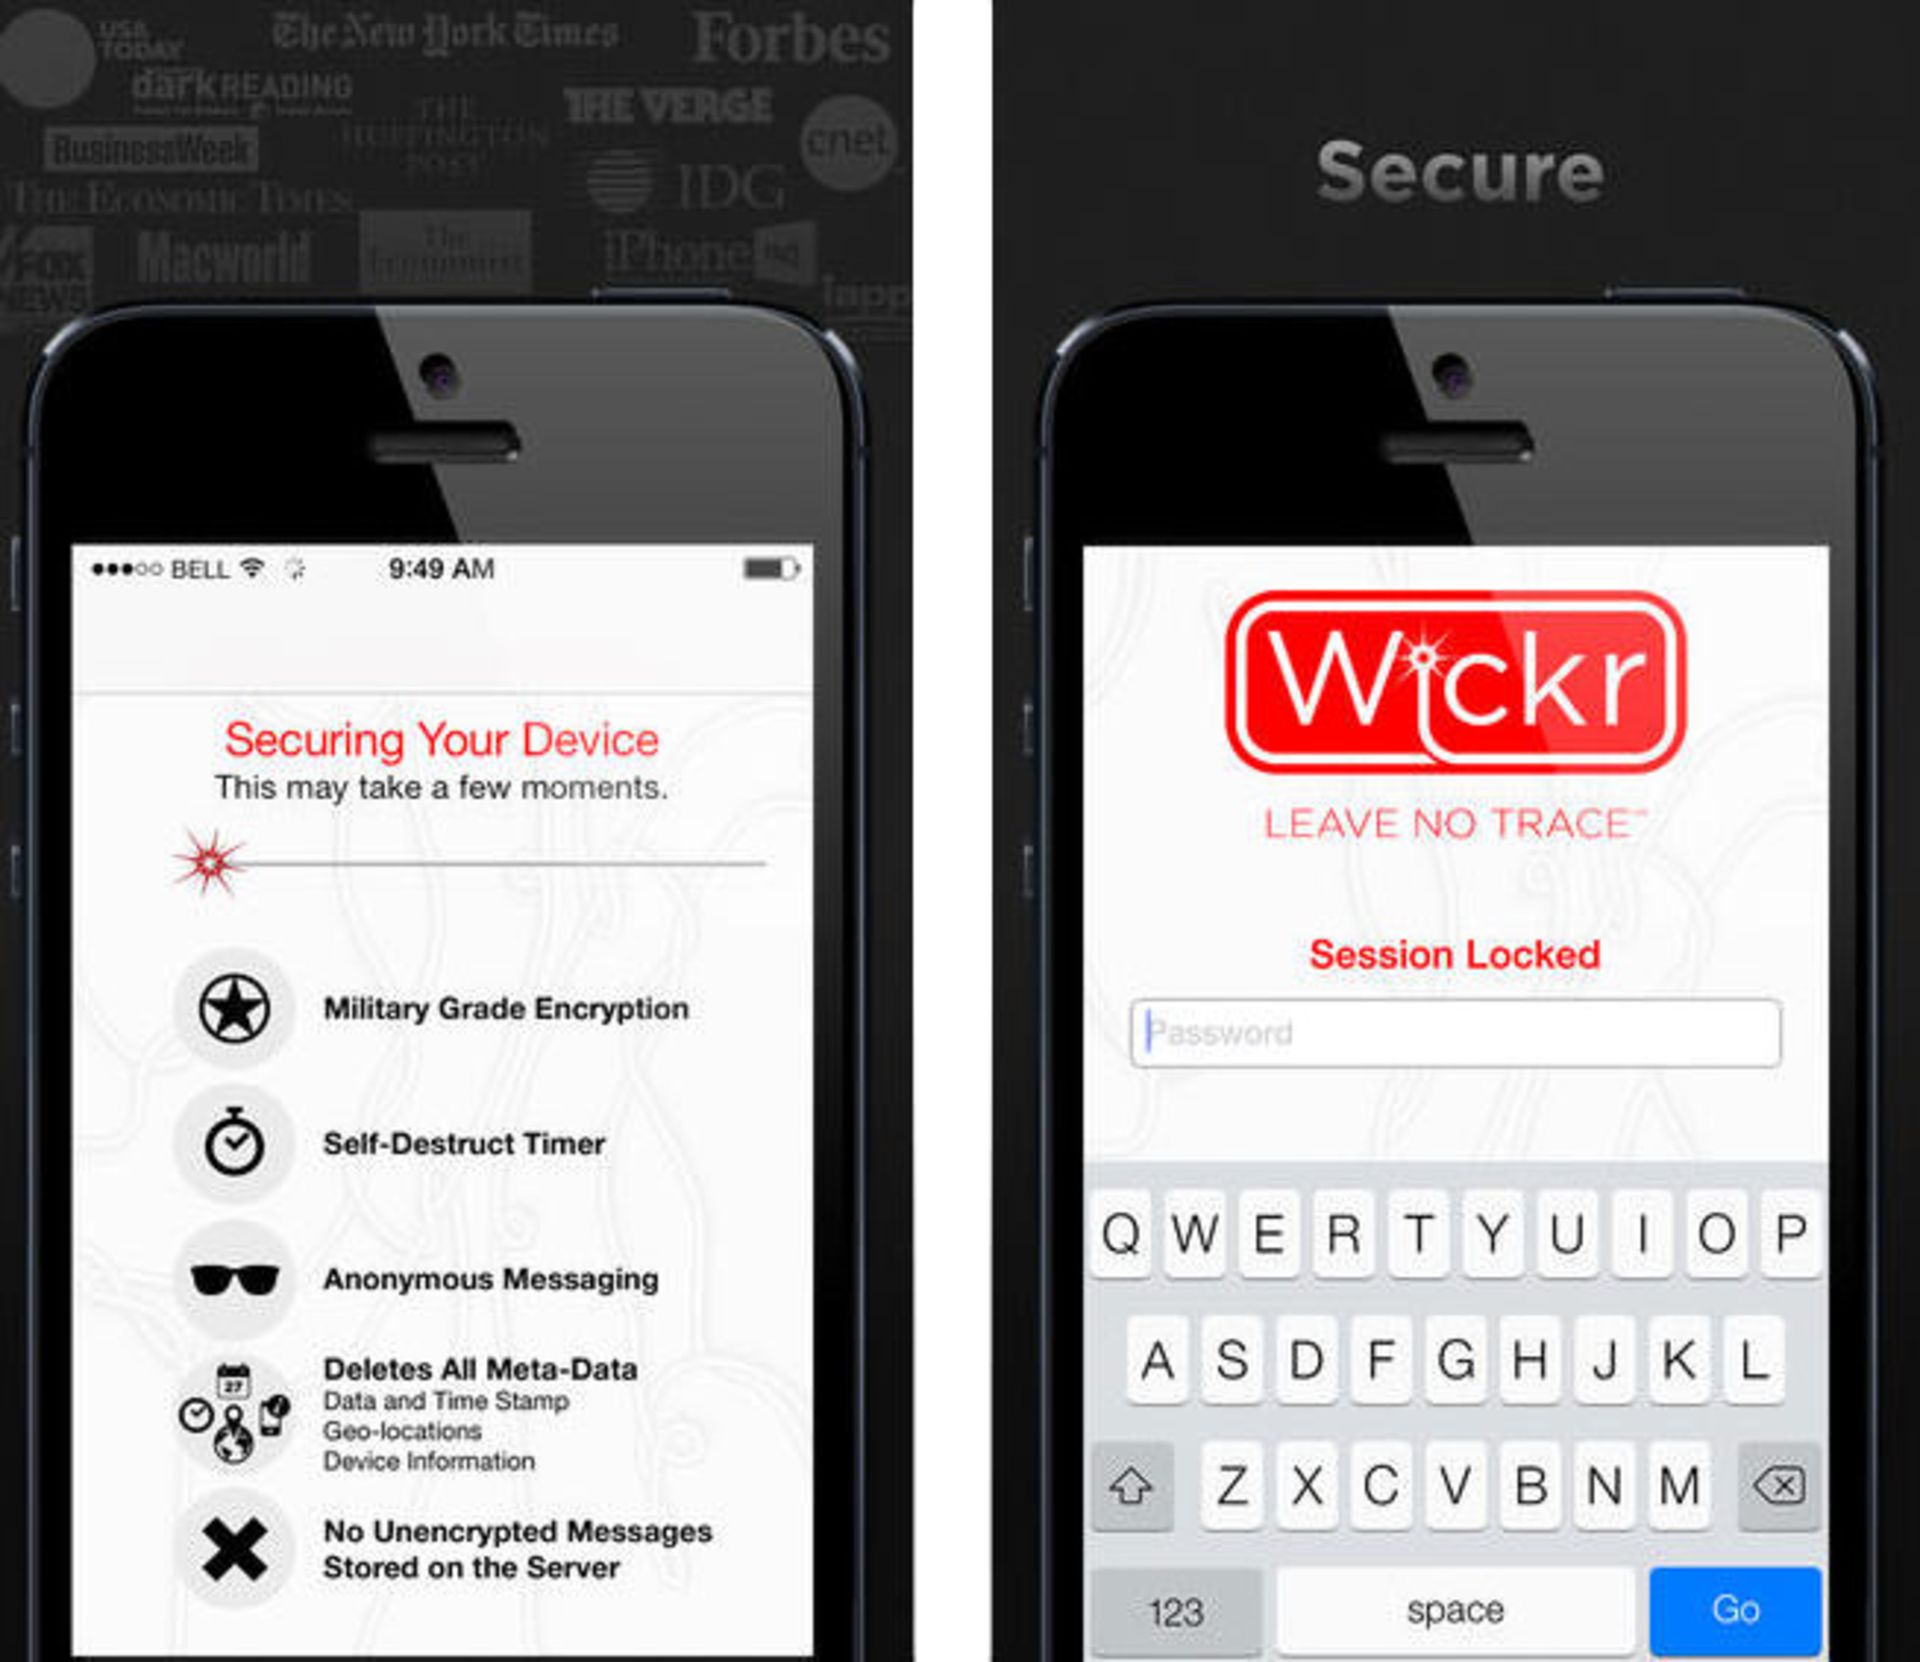 Wickr---Self-Destructing--Secure--Private--Anonymous-Messages---Media-on-the-App-Store-on-iTunes